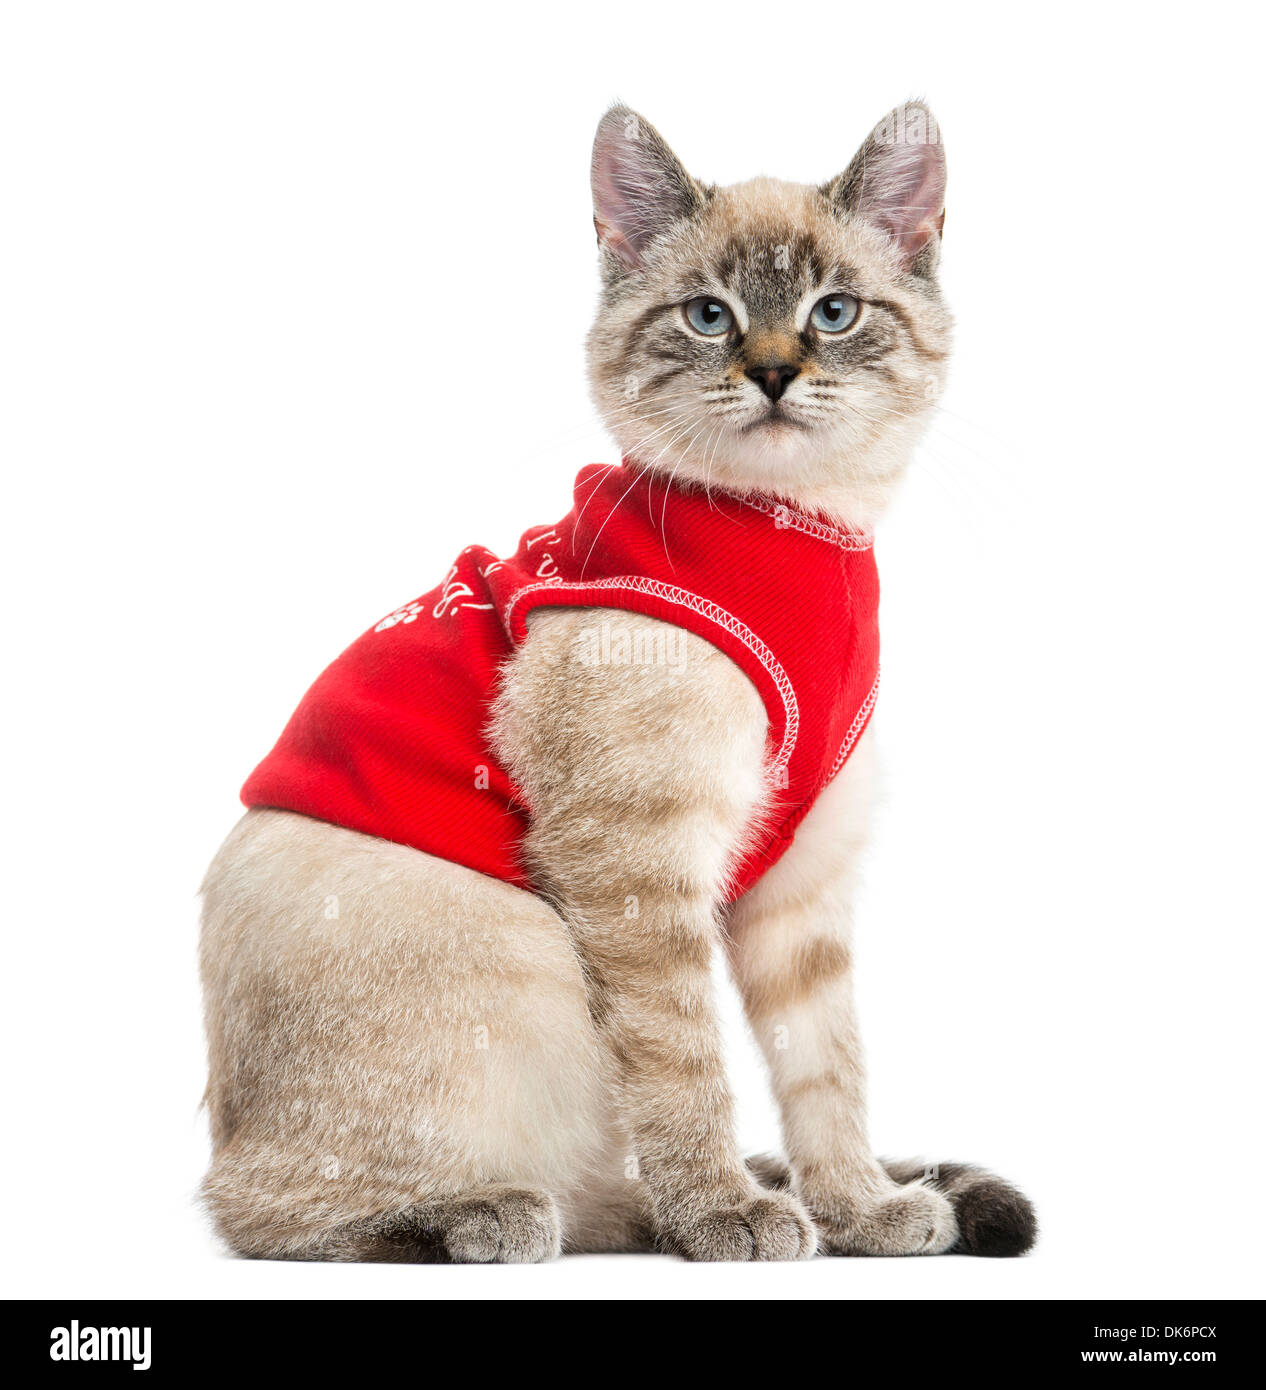 Side view of a Siamese cat with red top, looking at the camera, 5 months old, against white background Stock Photo